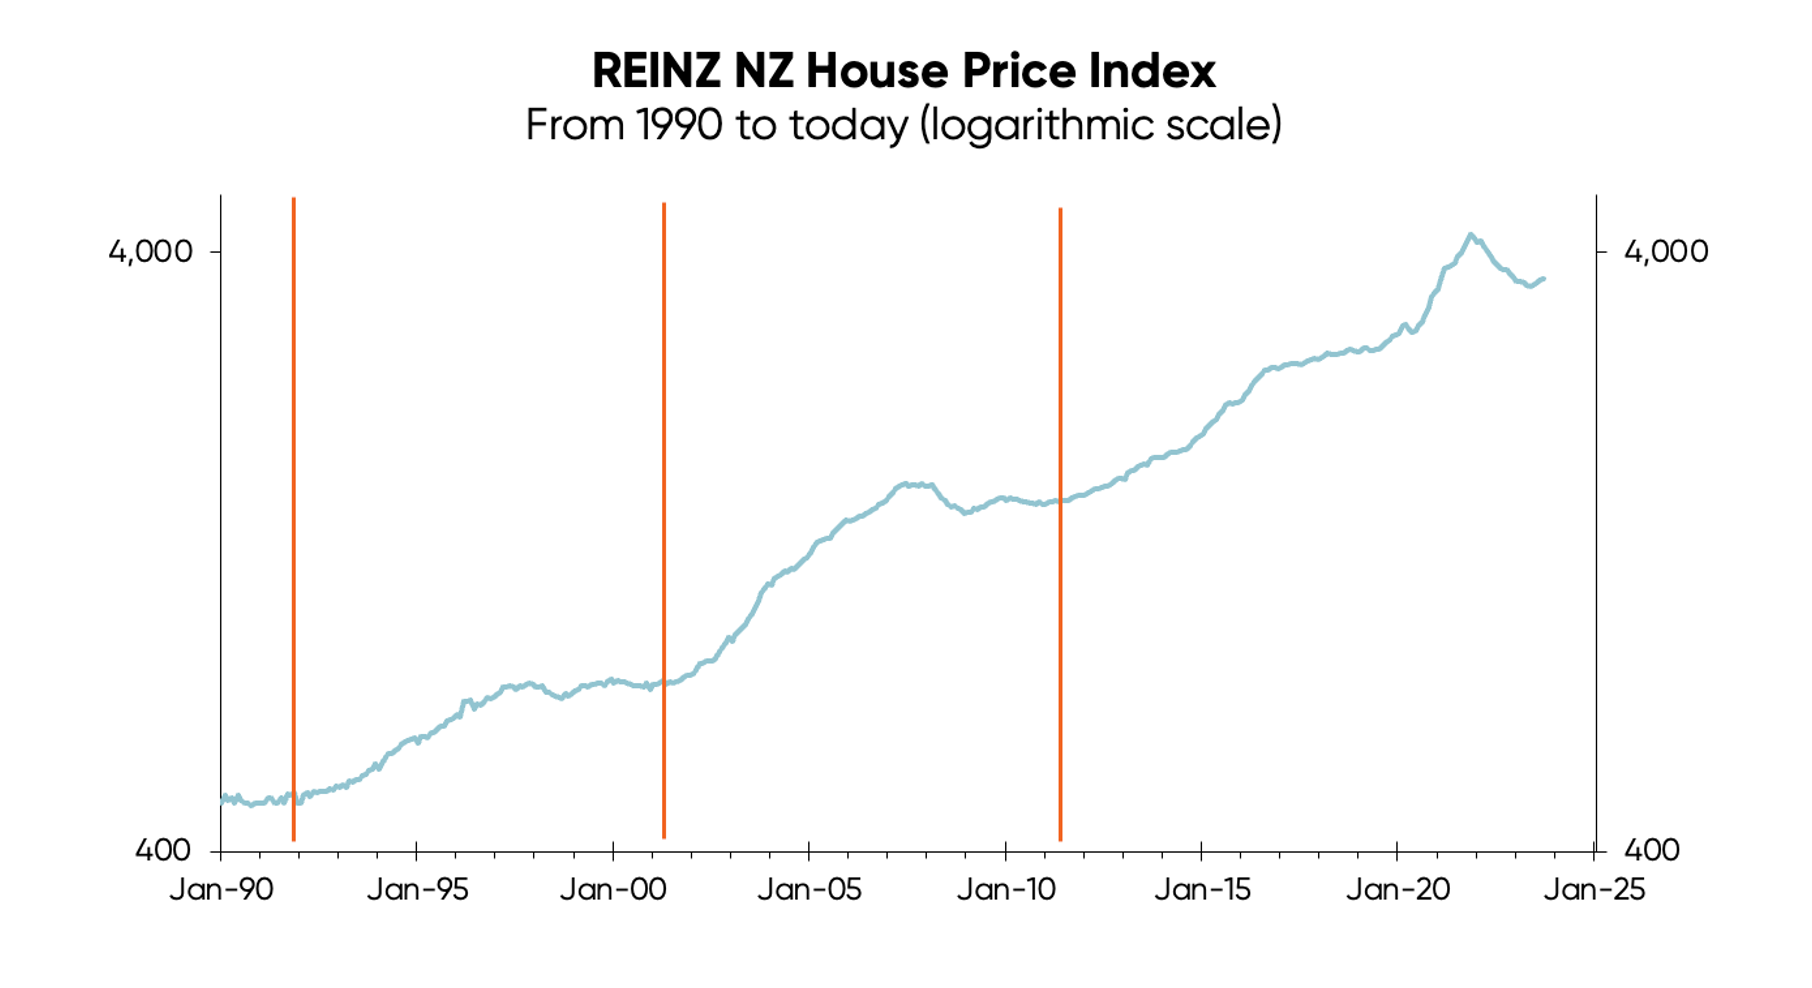 Chart tracking national house prices since 1990s using REINZ NZ house price index